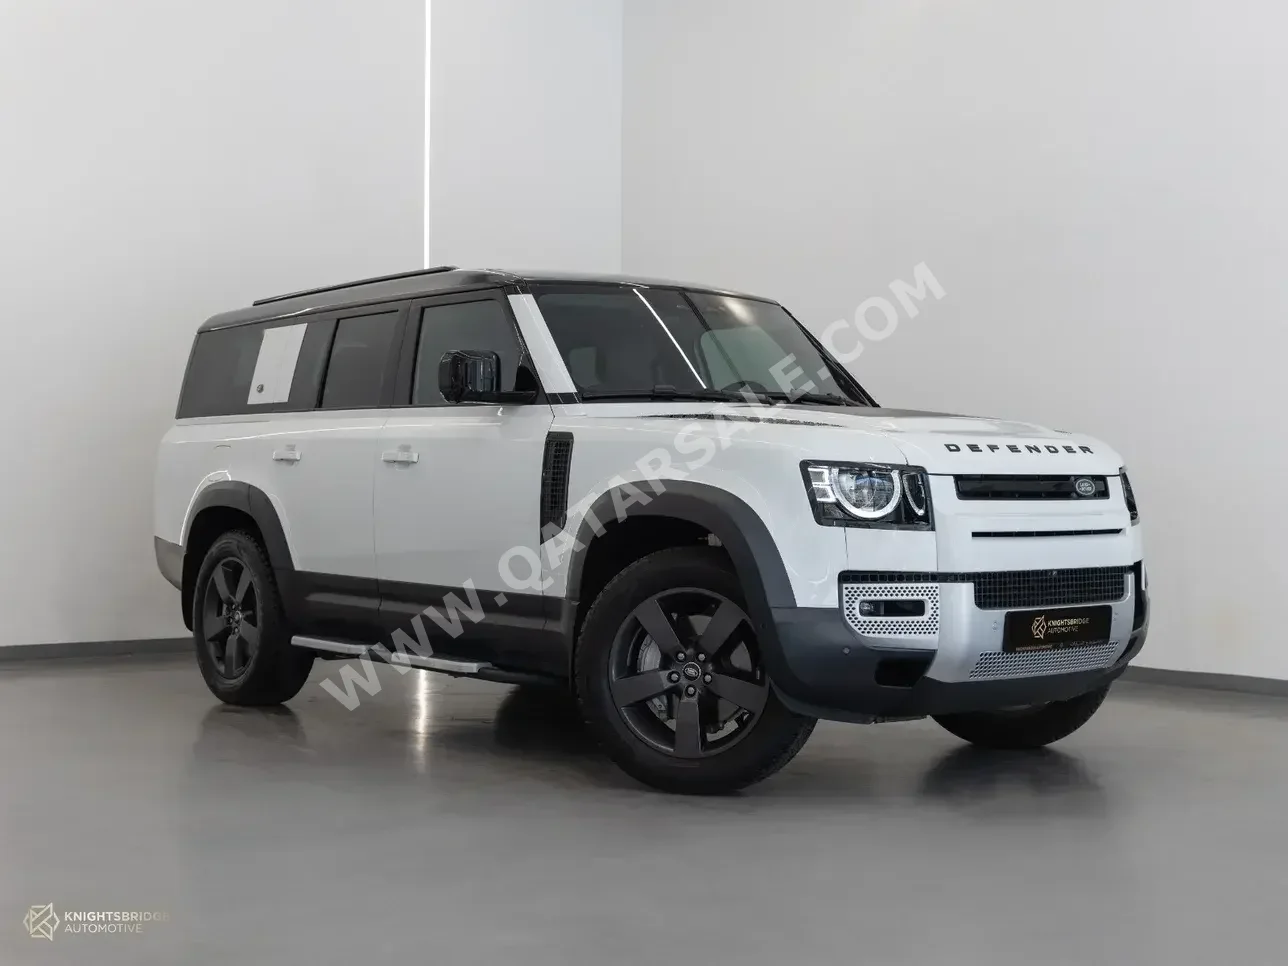 Land Rover  Defender  130 HSE  2023  Automatic  13,100 Km  6 Cylinder  Four Wheel Drive (4WD)  SUV  White  With Warranty